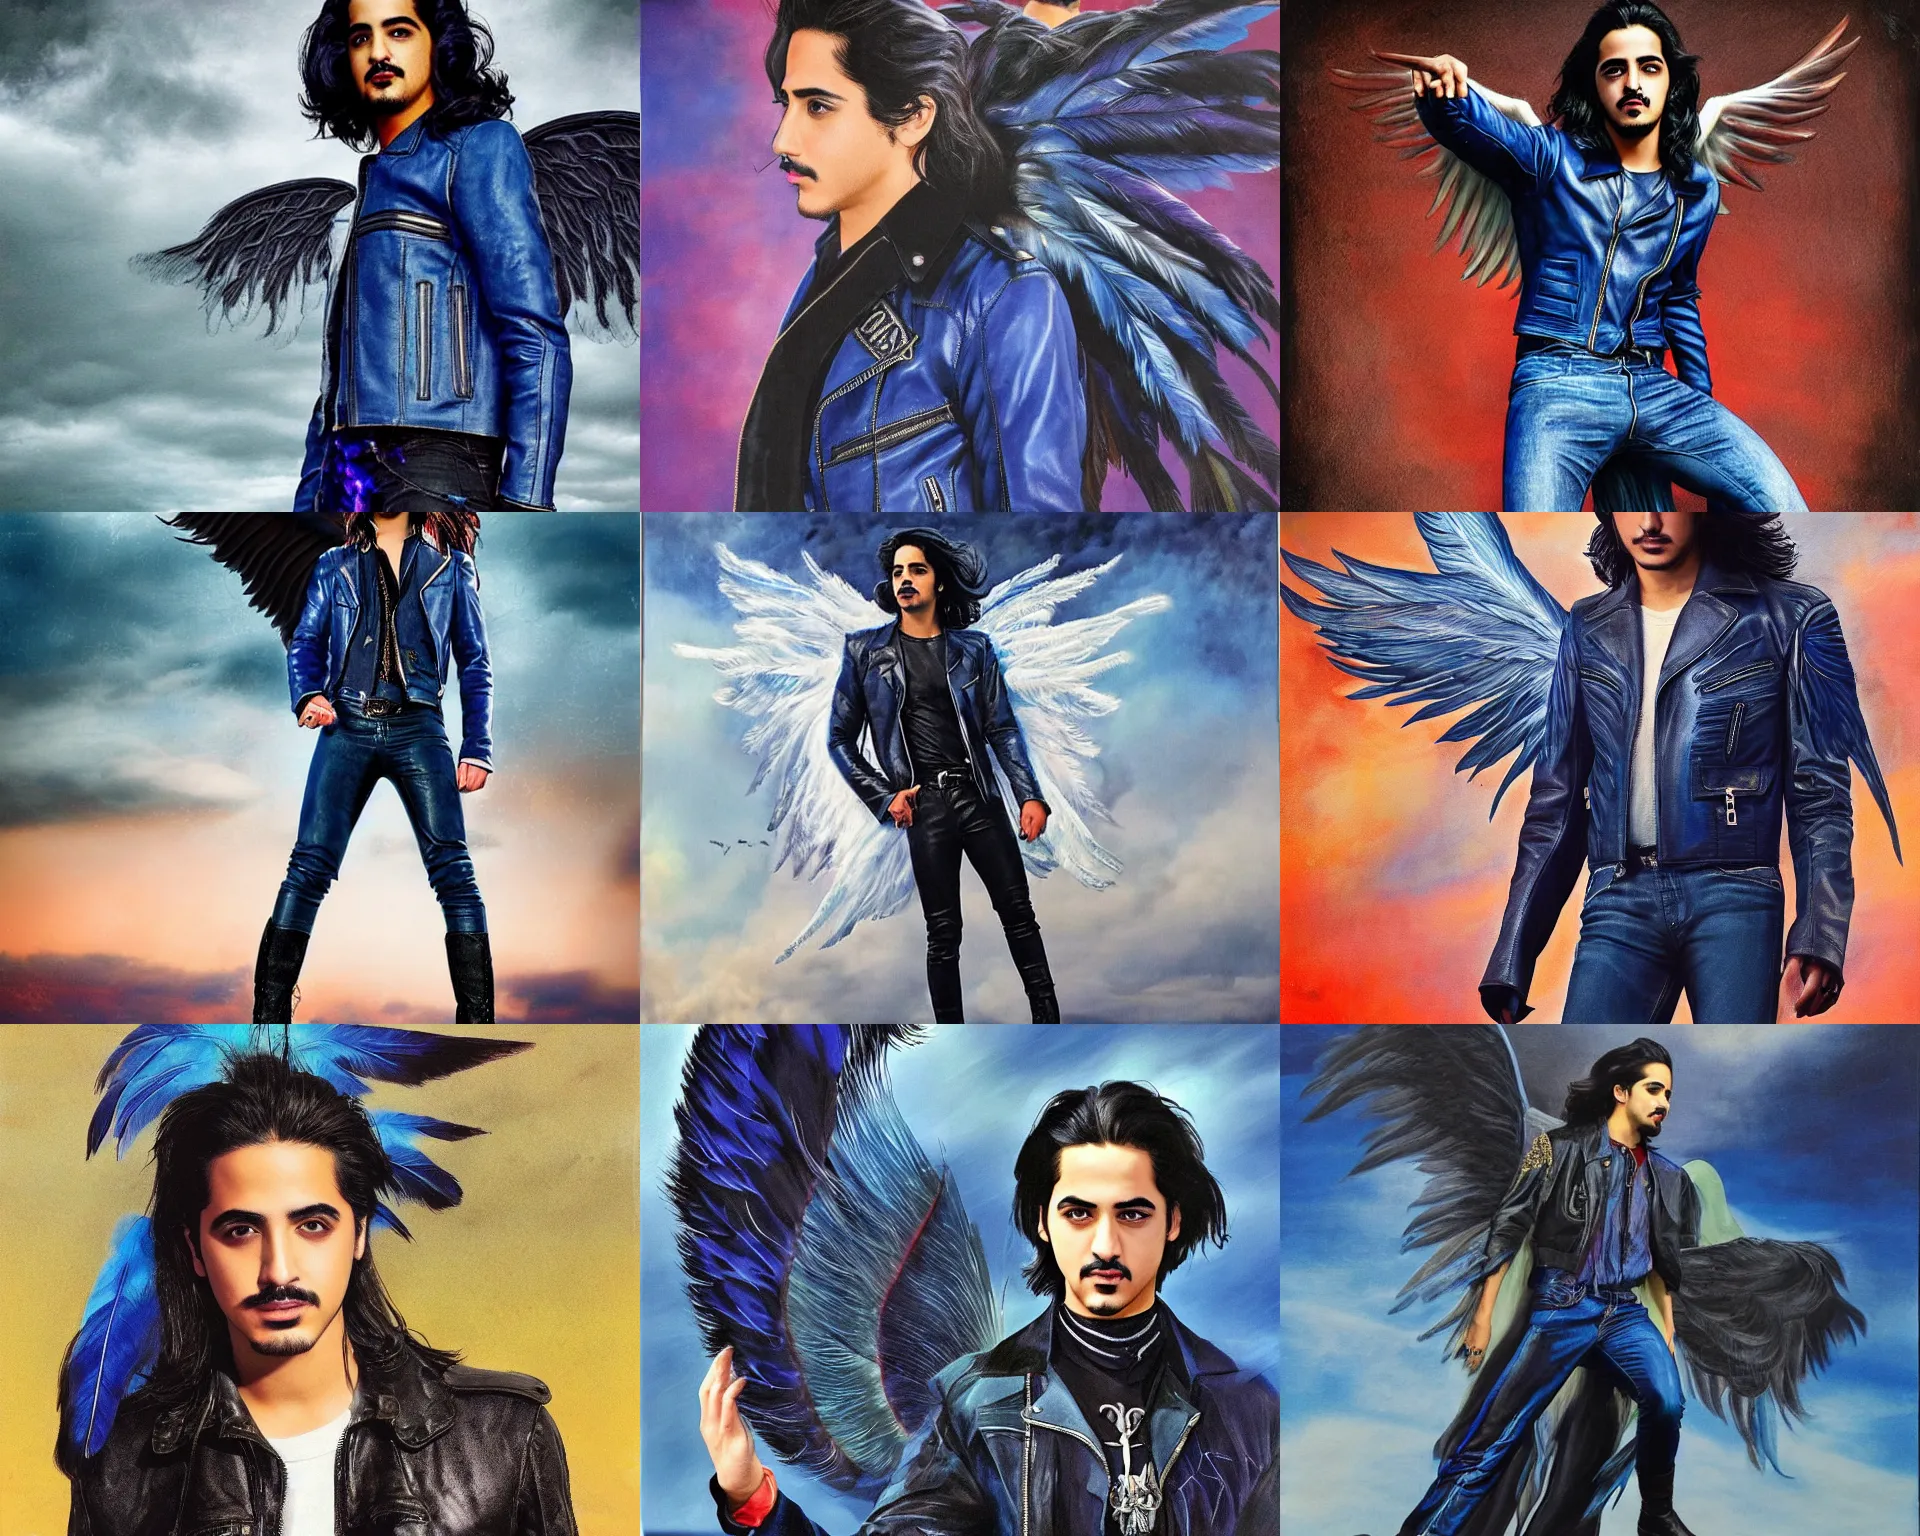 Prompt: angel avan jogia with blue-indigo-feather wings. Leather jacket, boots and jeans. Flying in a stormy sky. Distant full body shot. Artwork by Alex Ross